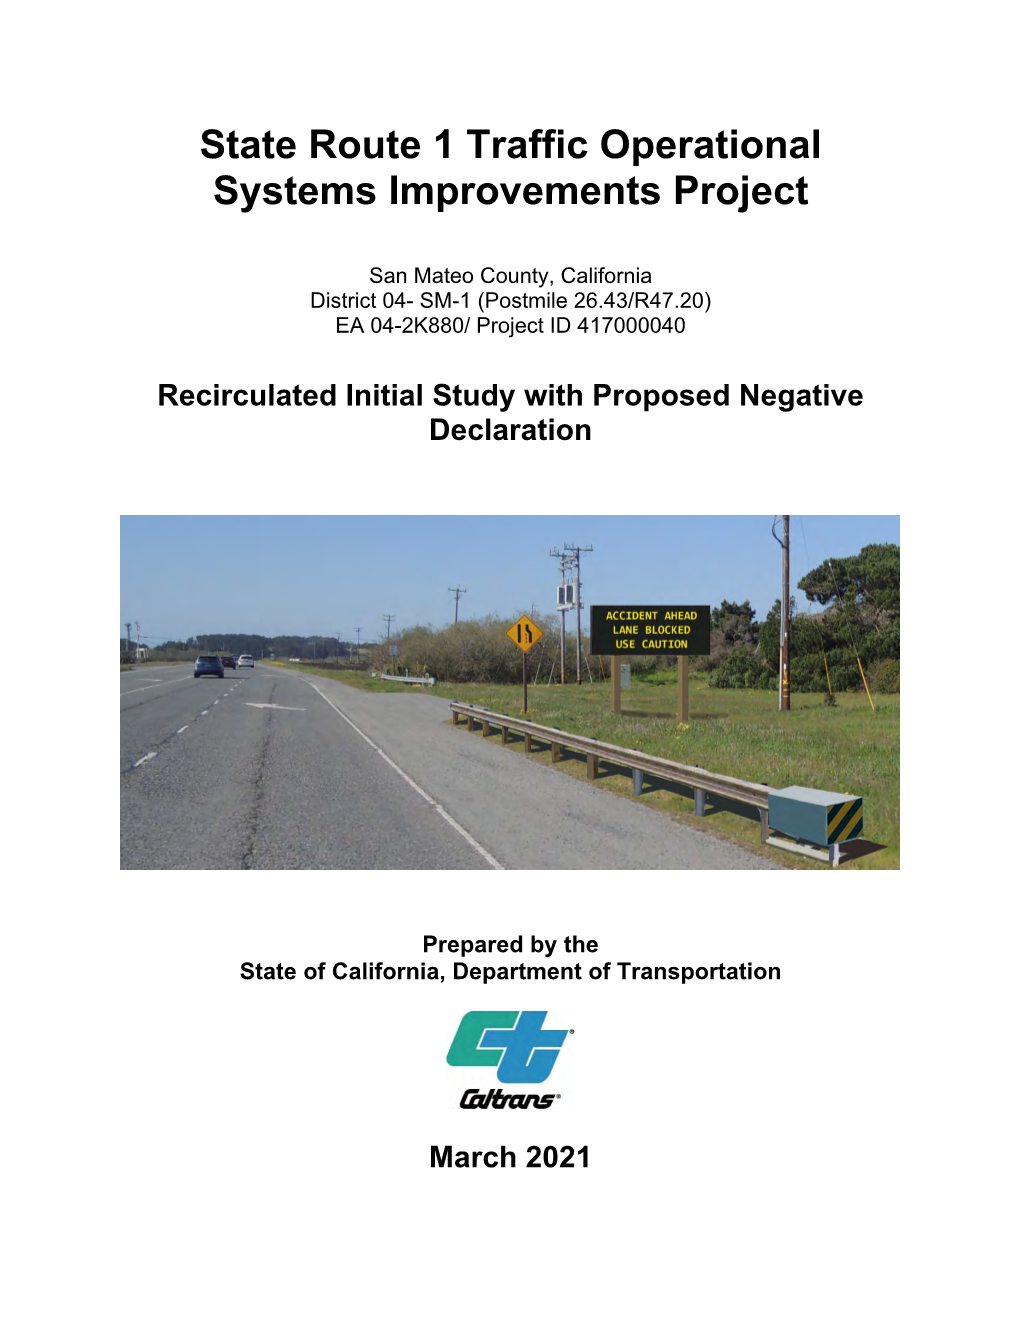 State Route 1 Traffic Operational Systems Improvements Project